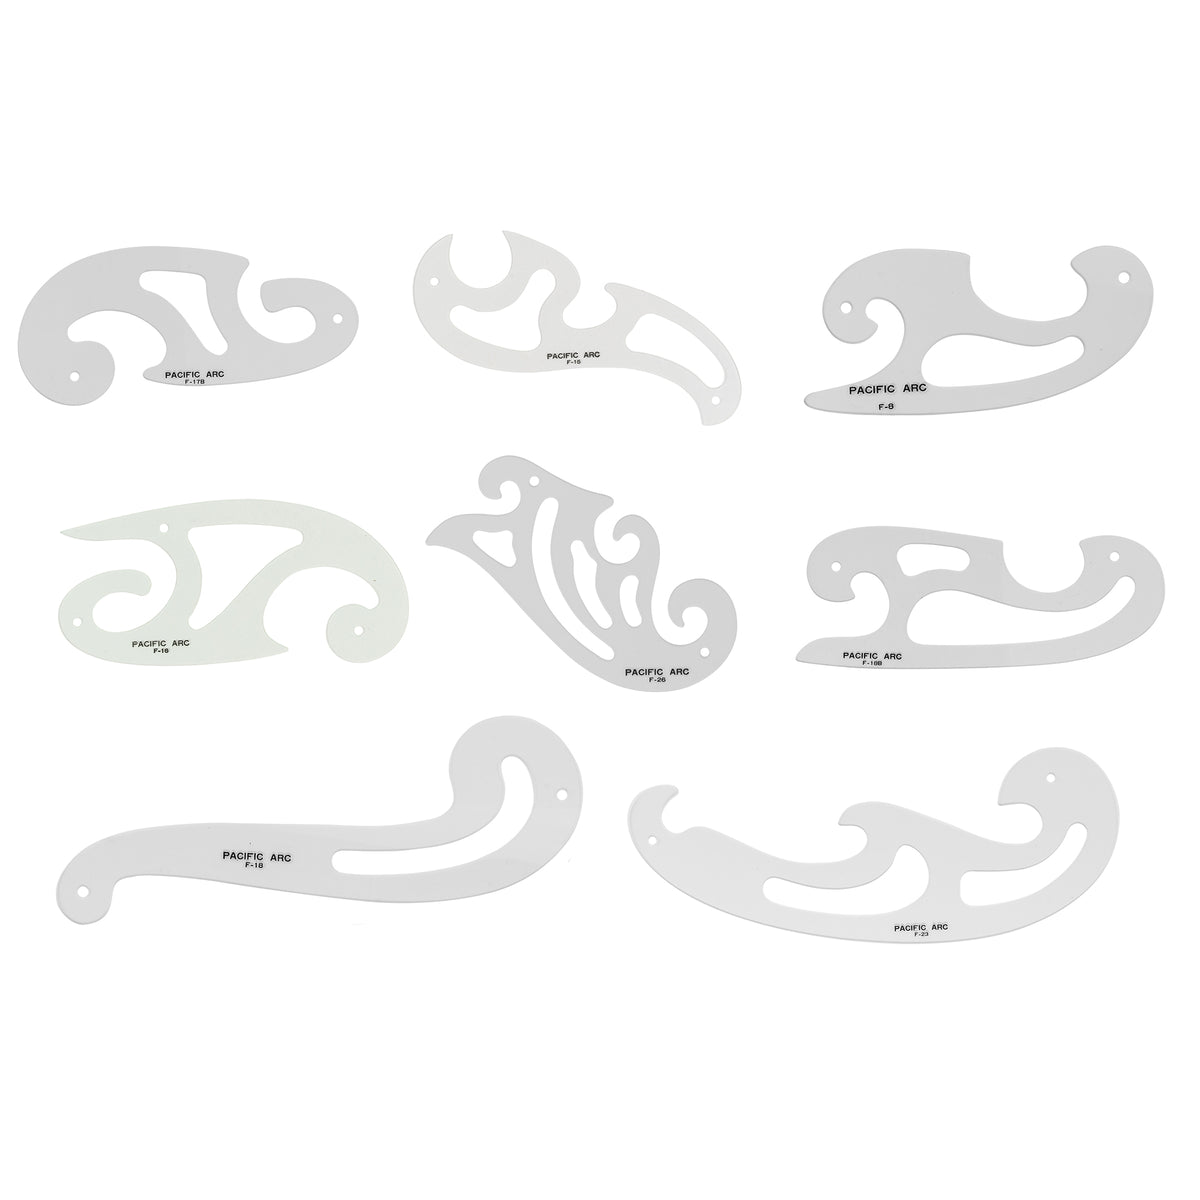 Four-piece French Curve Set on sale at